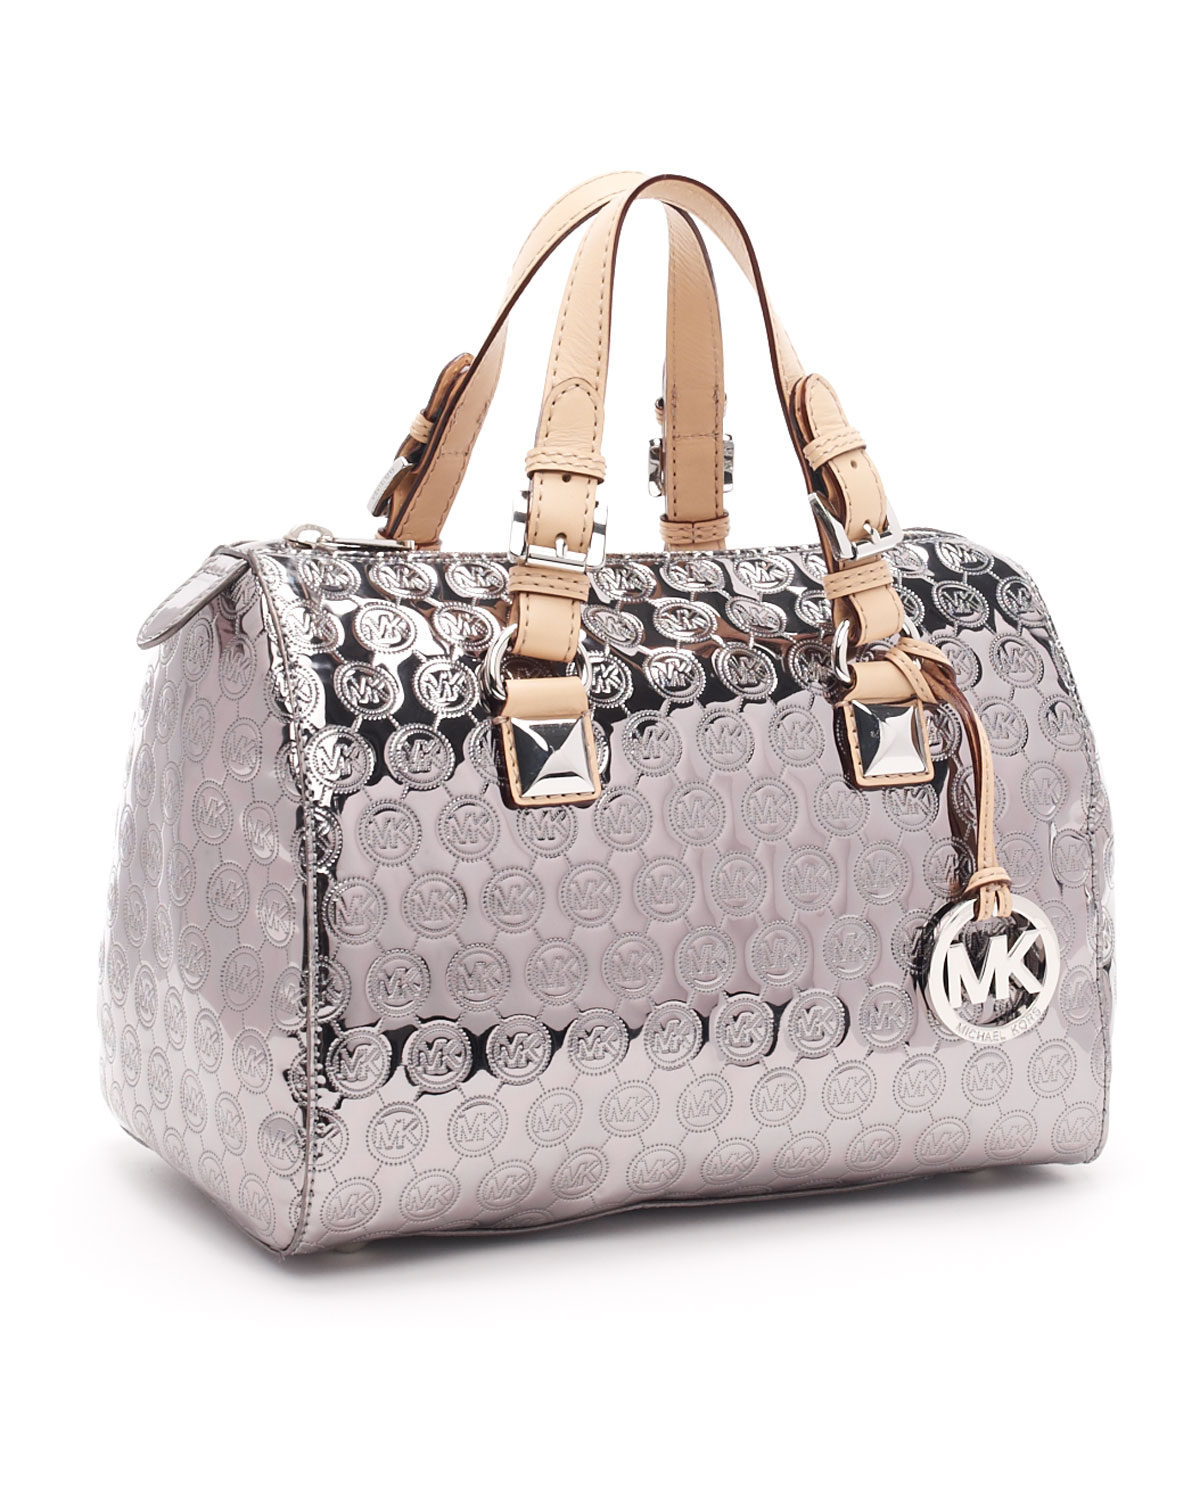 Michael Kors Purse With Silver Studs 